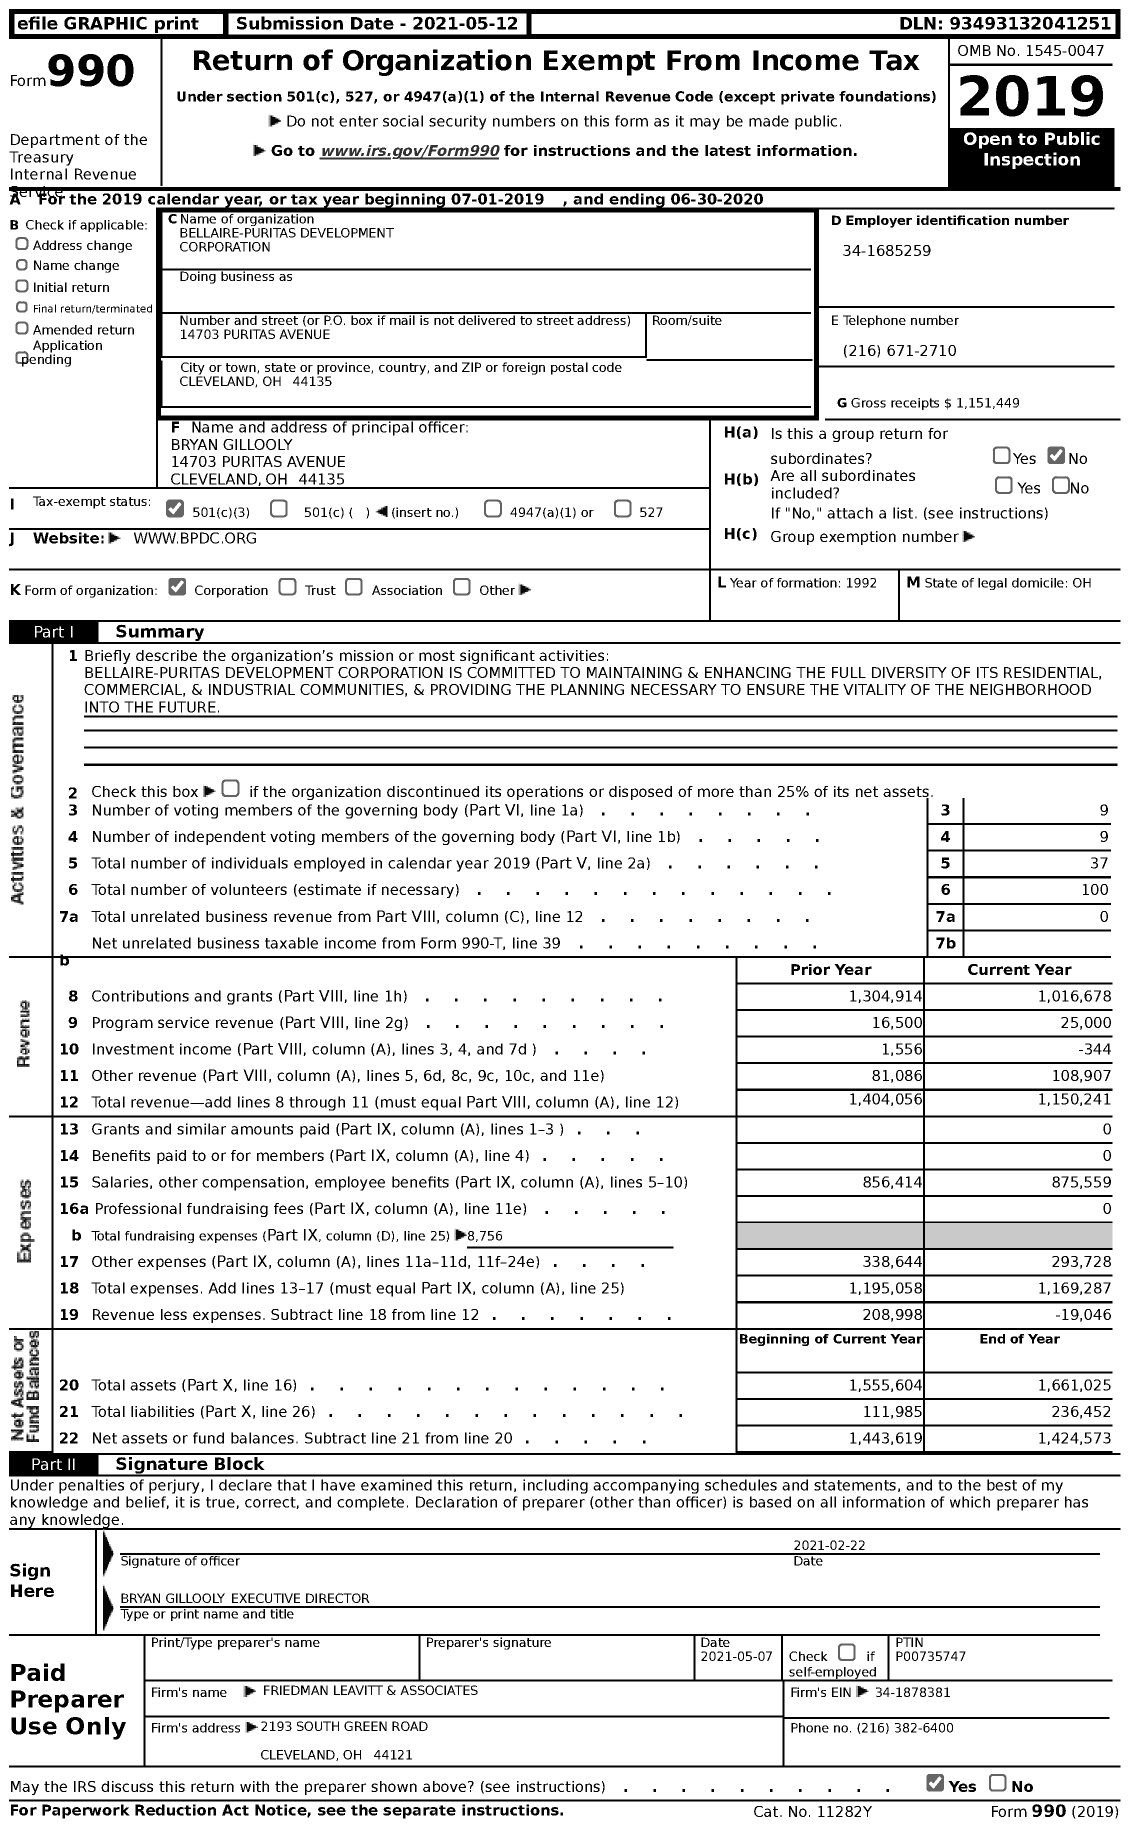 Image of first page of 2019 Form 990 for Bellaire-Puritas Development Corporation